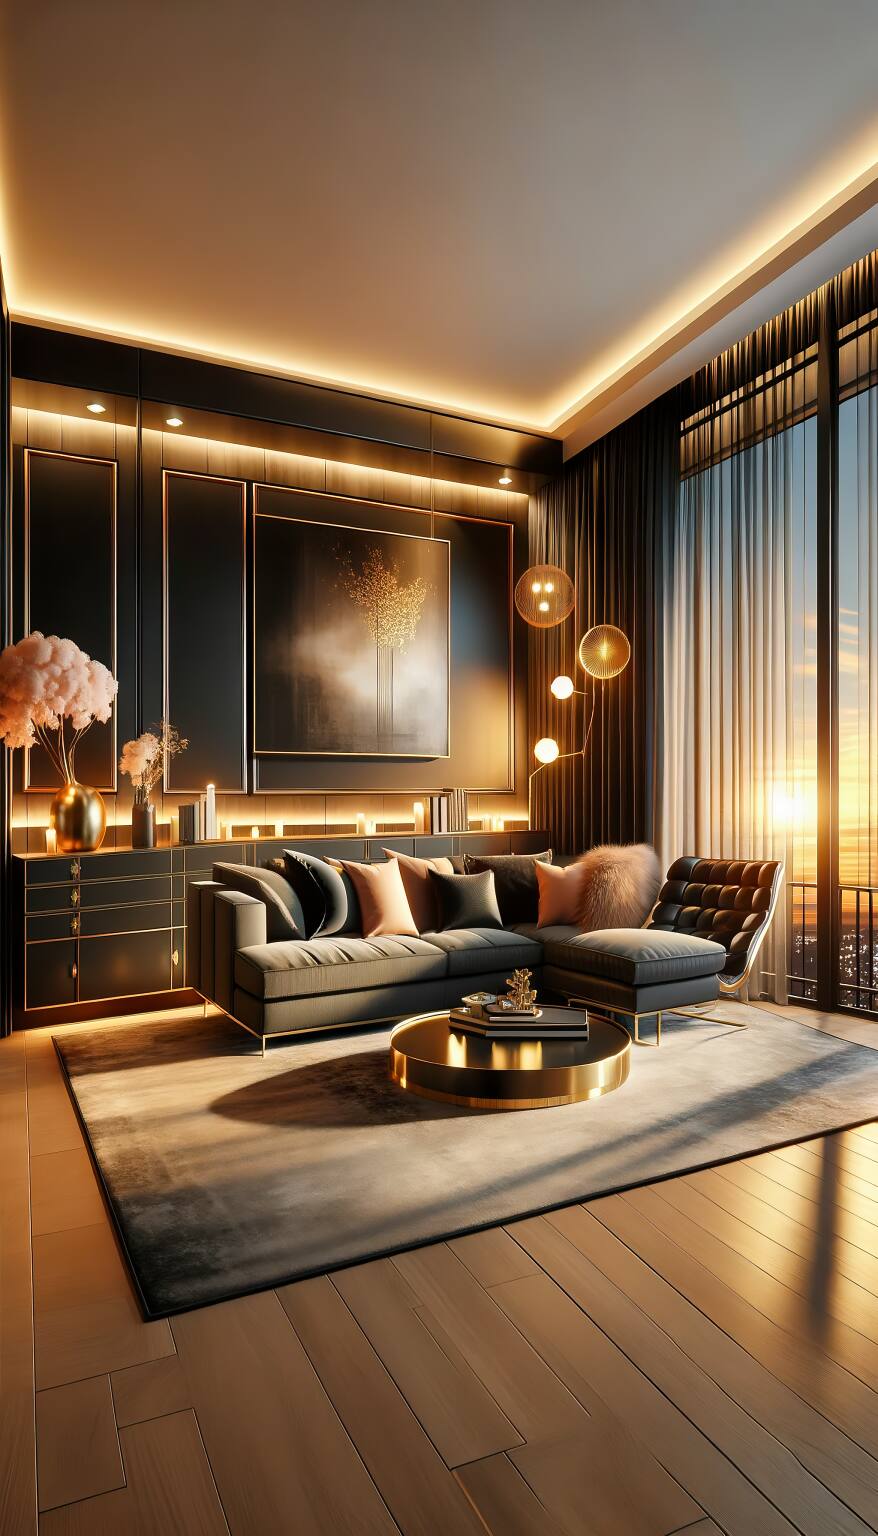 A Contemporary Romantic Living Room In Modern Black And Warm Gold, Featuring A Stylish Sectional Sofa And Elegant Entertainment Unit, Set Against A Backdrop Of Twilight Warmth.